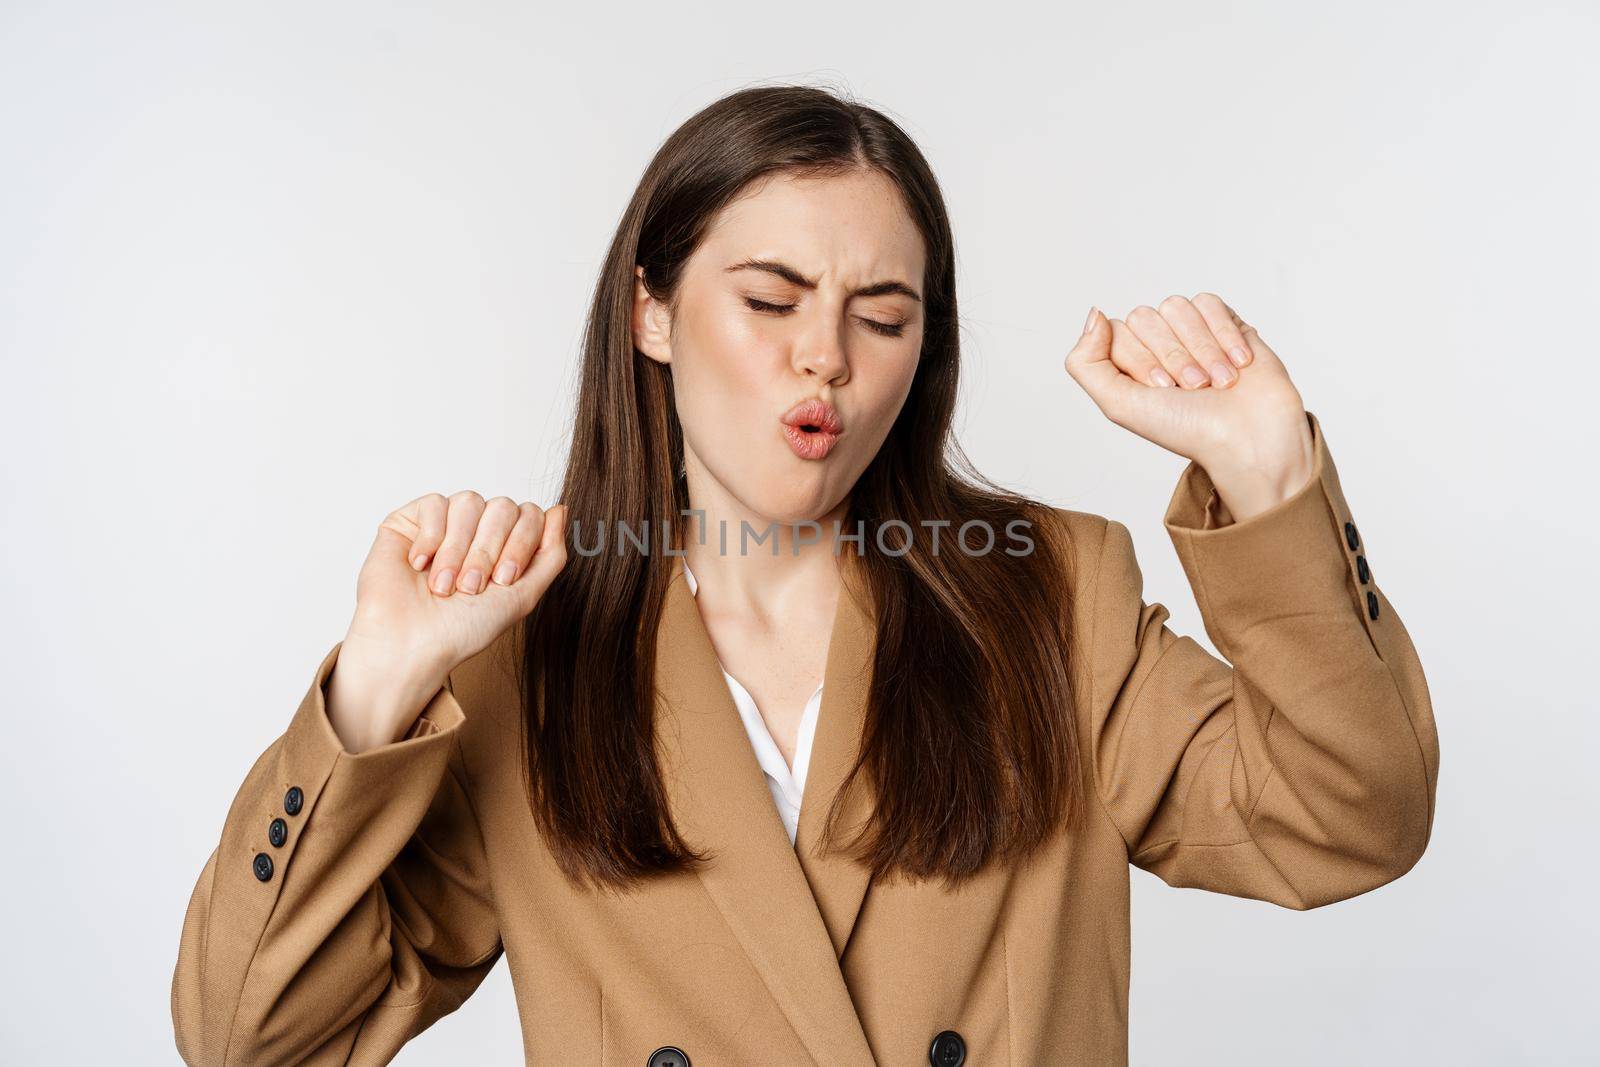 Successful businesswoman, saleswoman dancing and having fun, wearing office suit, posing over white background.